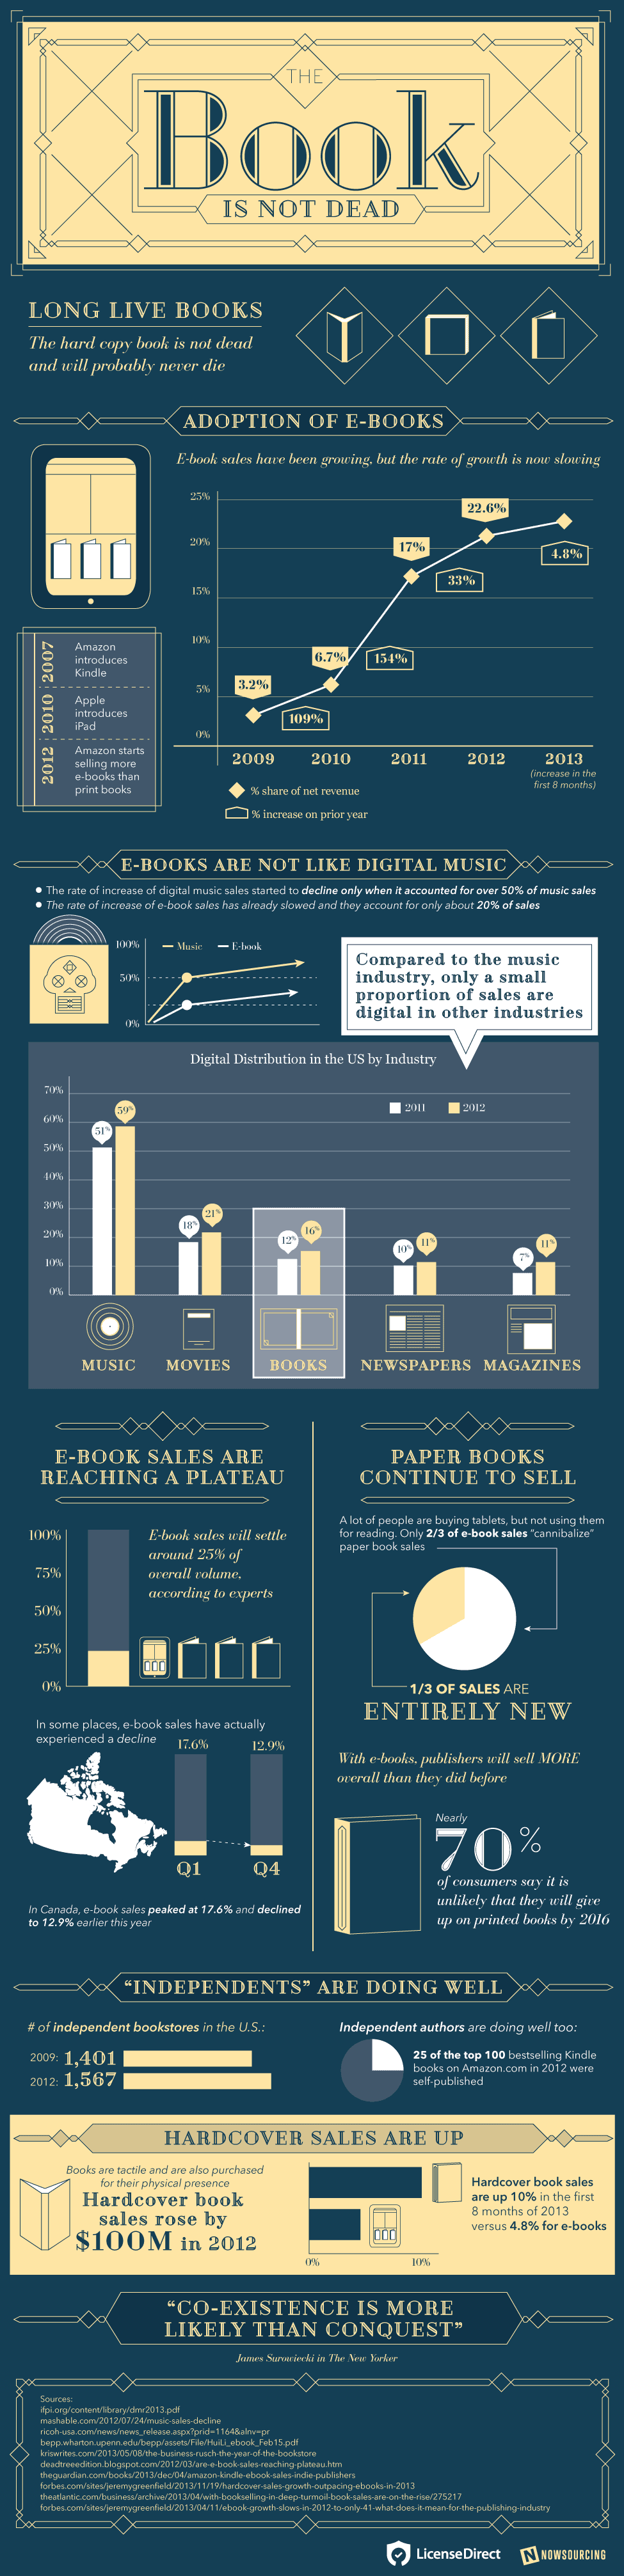 The Book Is Not Dead - Infographic by License Direct